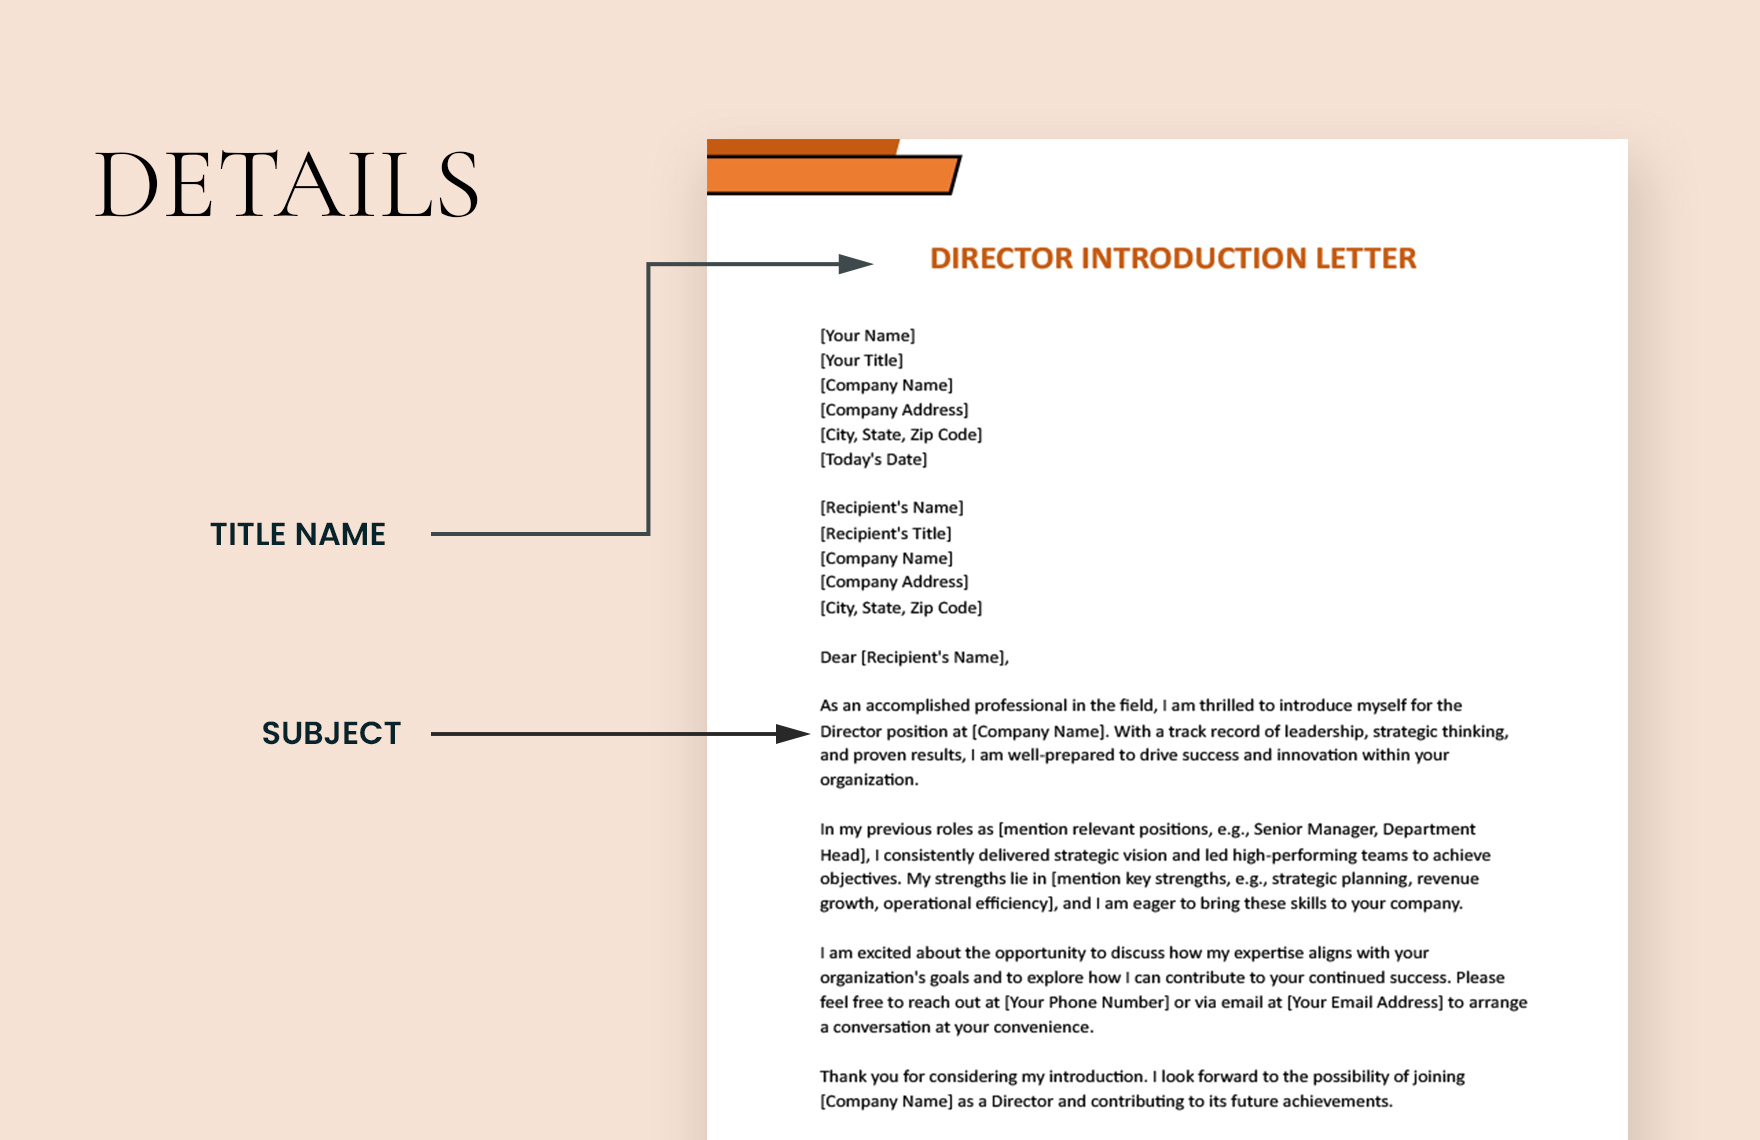 Director Introduction Letter